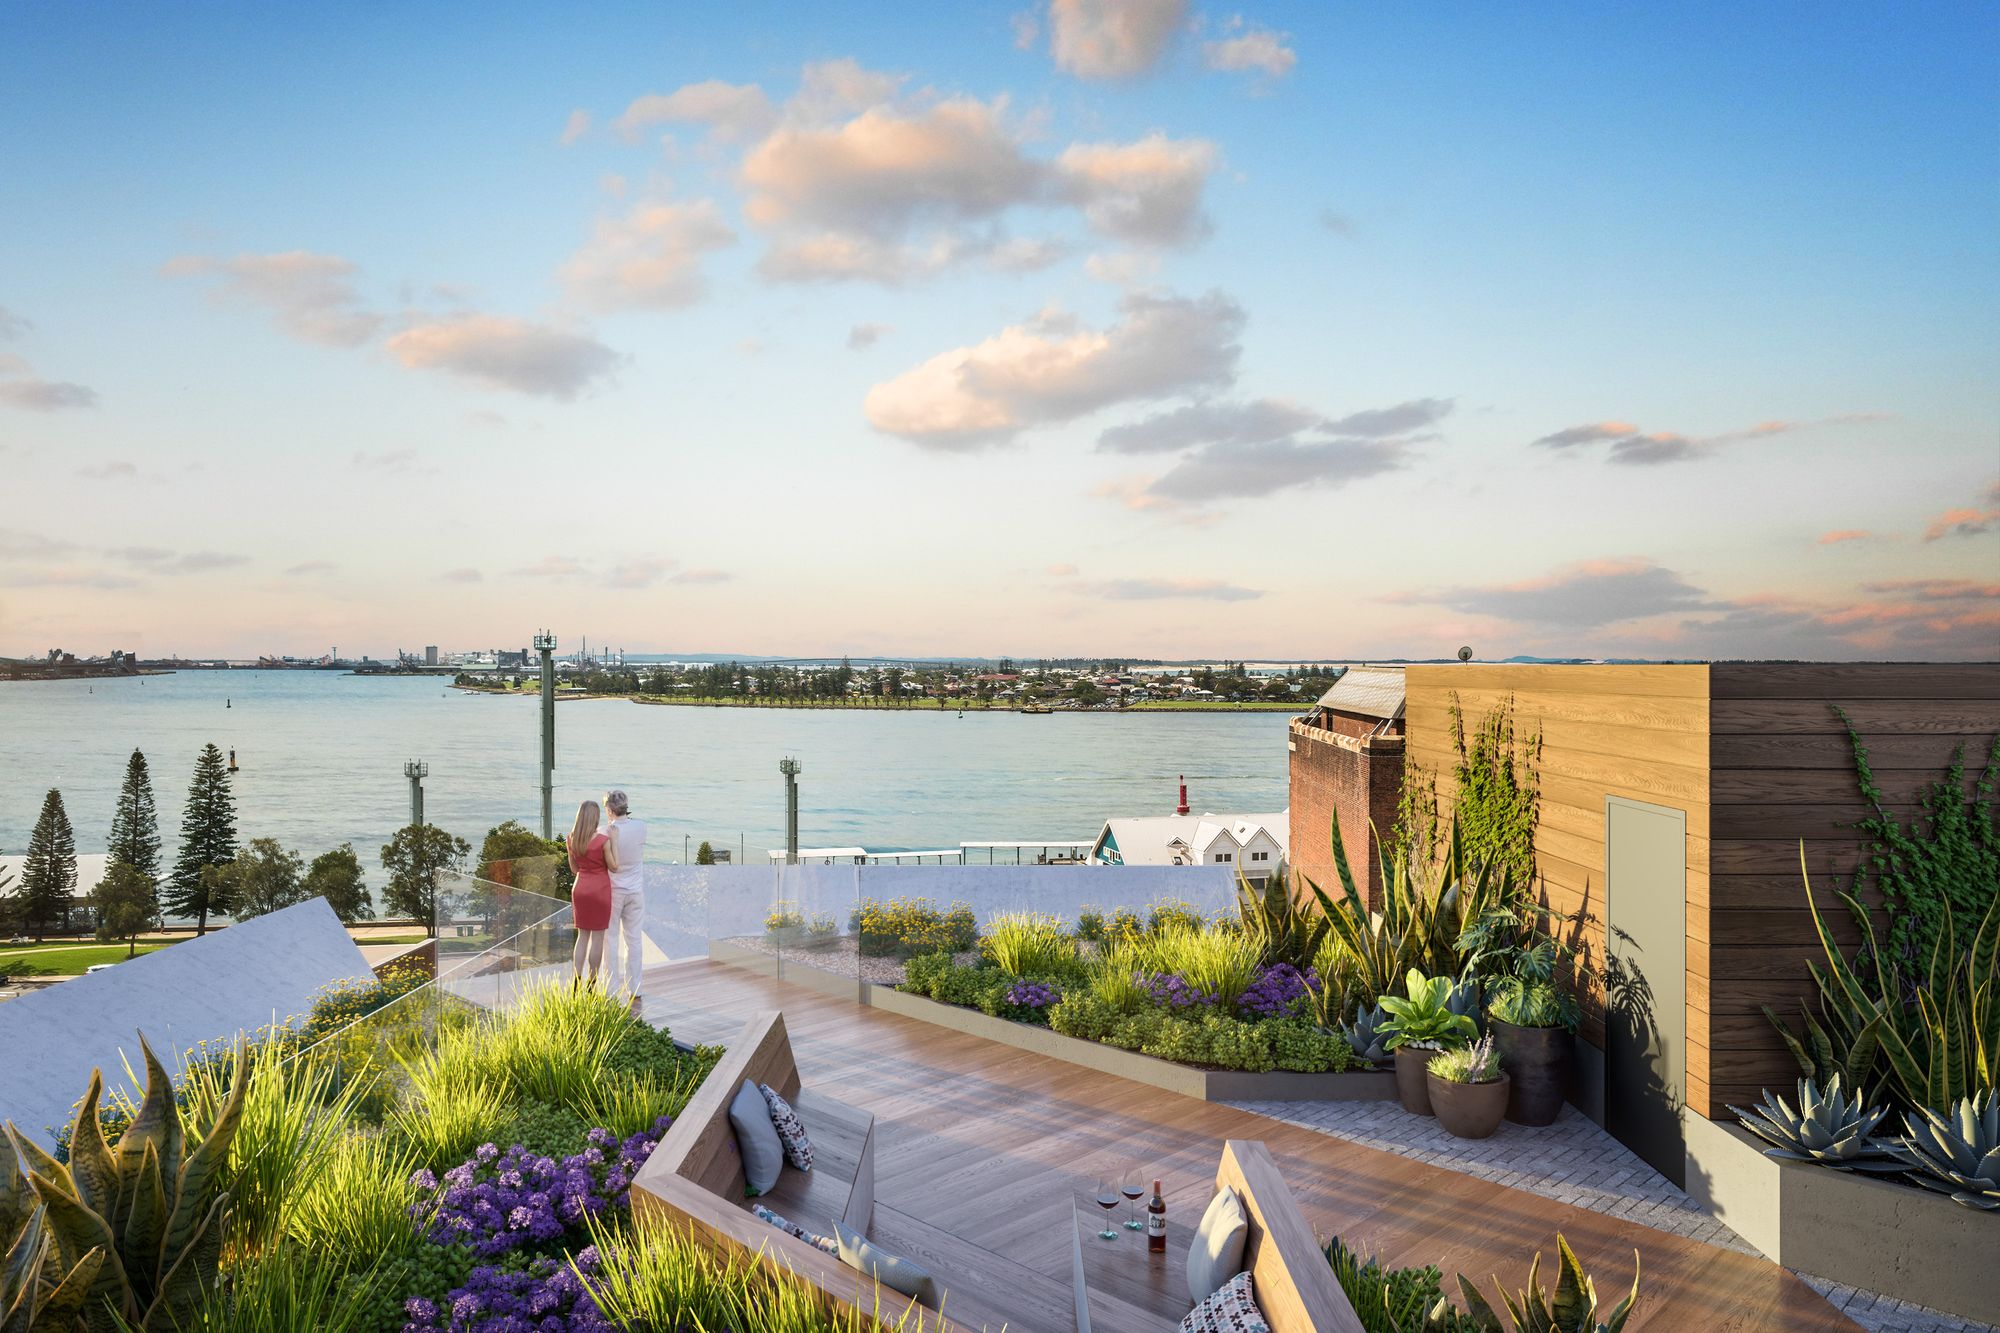 The image showcases a rooftop terrace garden during the evening with a breathtaking view of a serene body of water and a distant city skyline. The terrace is adorned with wooden decking and a variety of lush, well-maintained plants. These include vibrant purple flowers, tall grasses, and succulents. A sunken seating area with plush cushions and a small table holding beverages provides a cozy spot for relaxation. On the right, a wooden structure with climbing plants forms a green wall, and an adjacent brick building adds a touch of historic charm. In the foreground, two individuals stand by a transparent barrier, admiring the picturesque view, bathed in the warm hues of the setting sun. The tranquil atmosphere suggests a perfect blend of urban living and nature's serenity.     Is this conversation helpful so far?